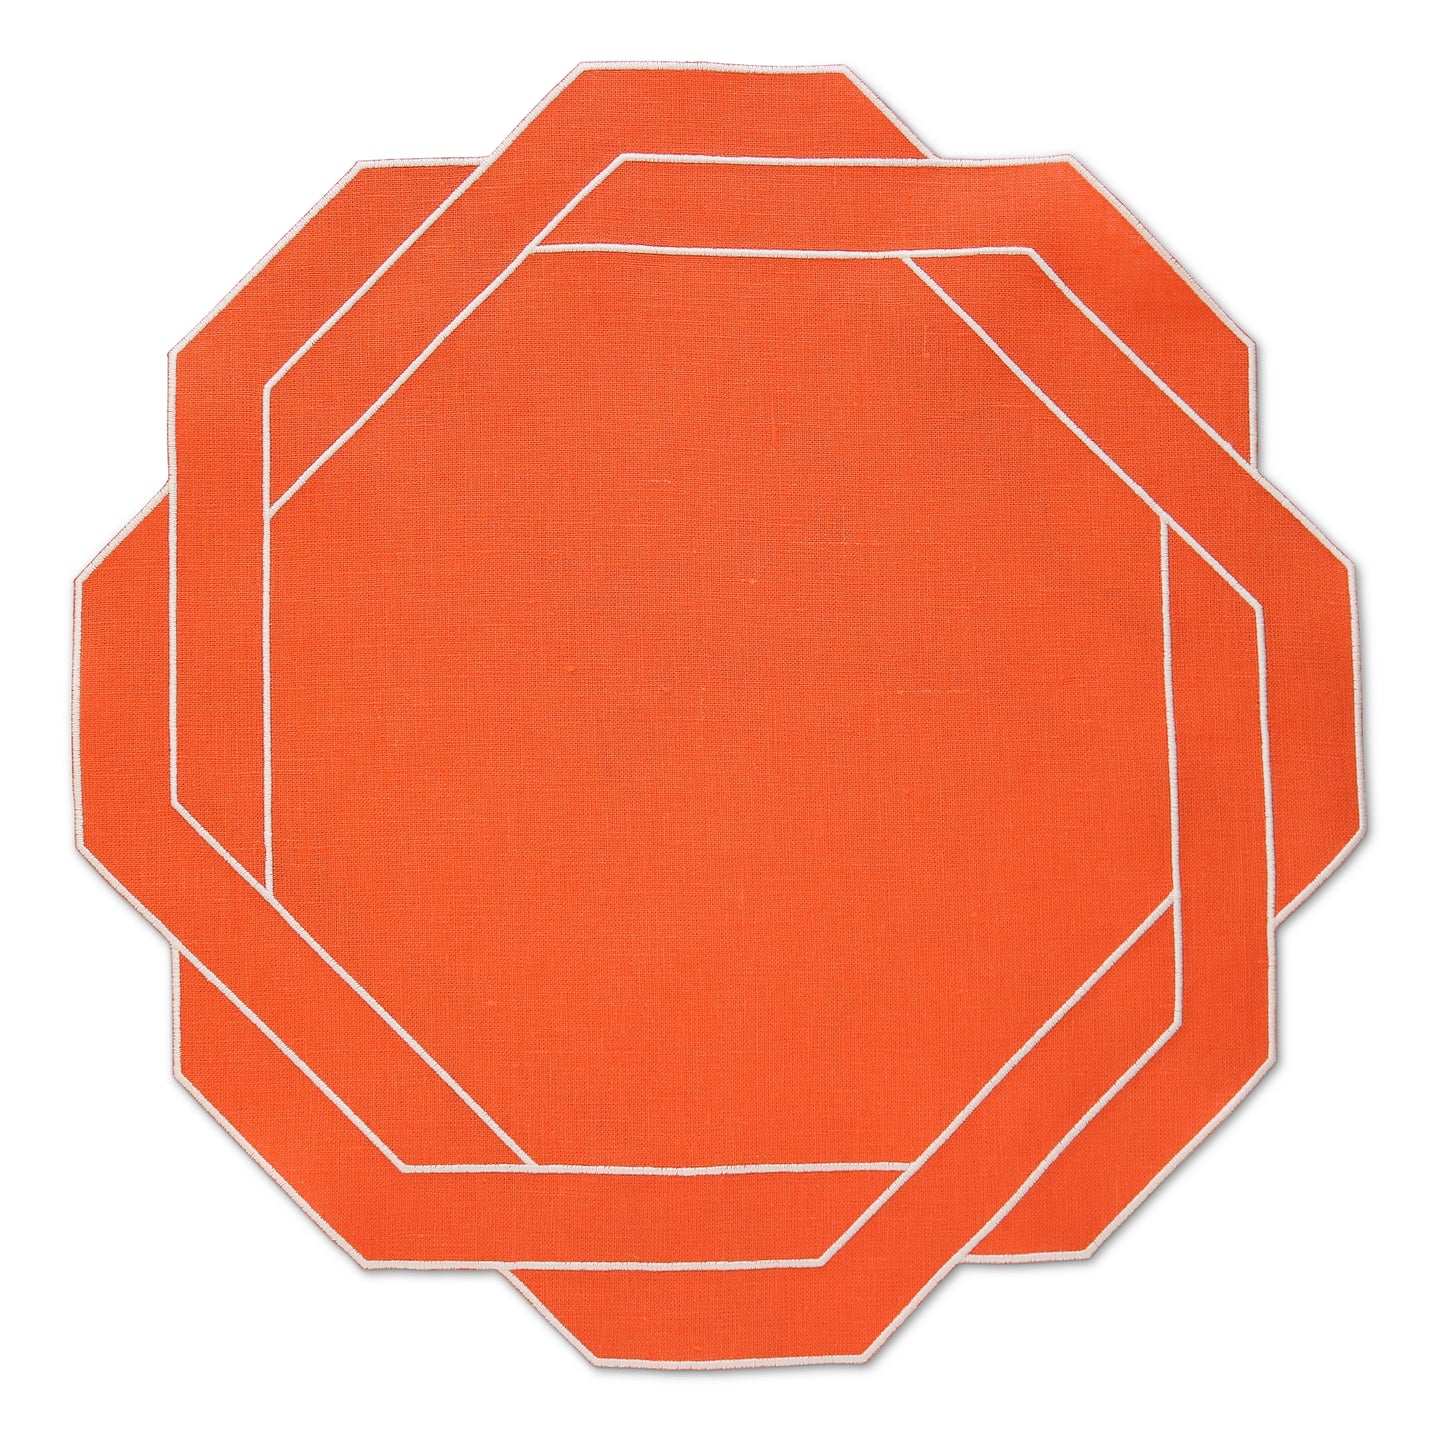 Made to order Trieste Octagonal linen placemats (set of 4)